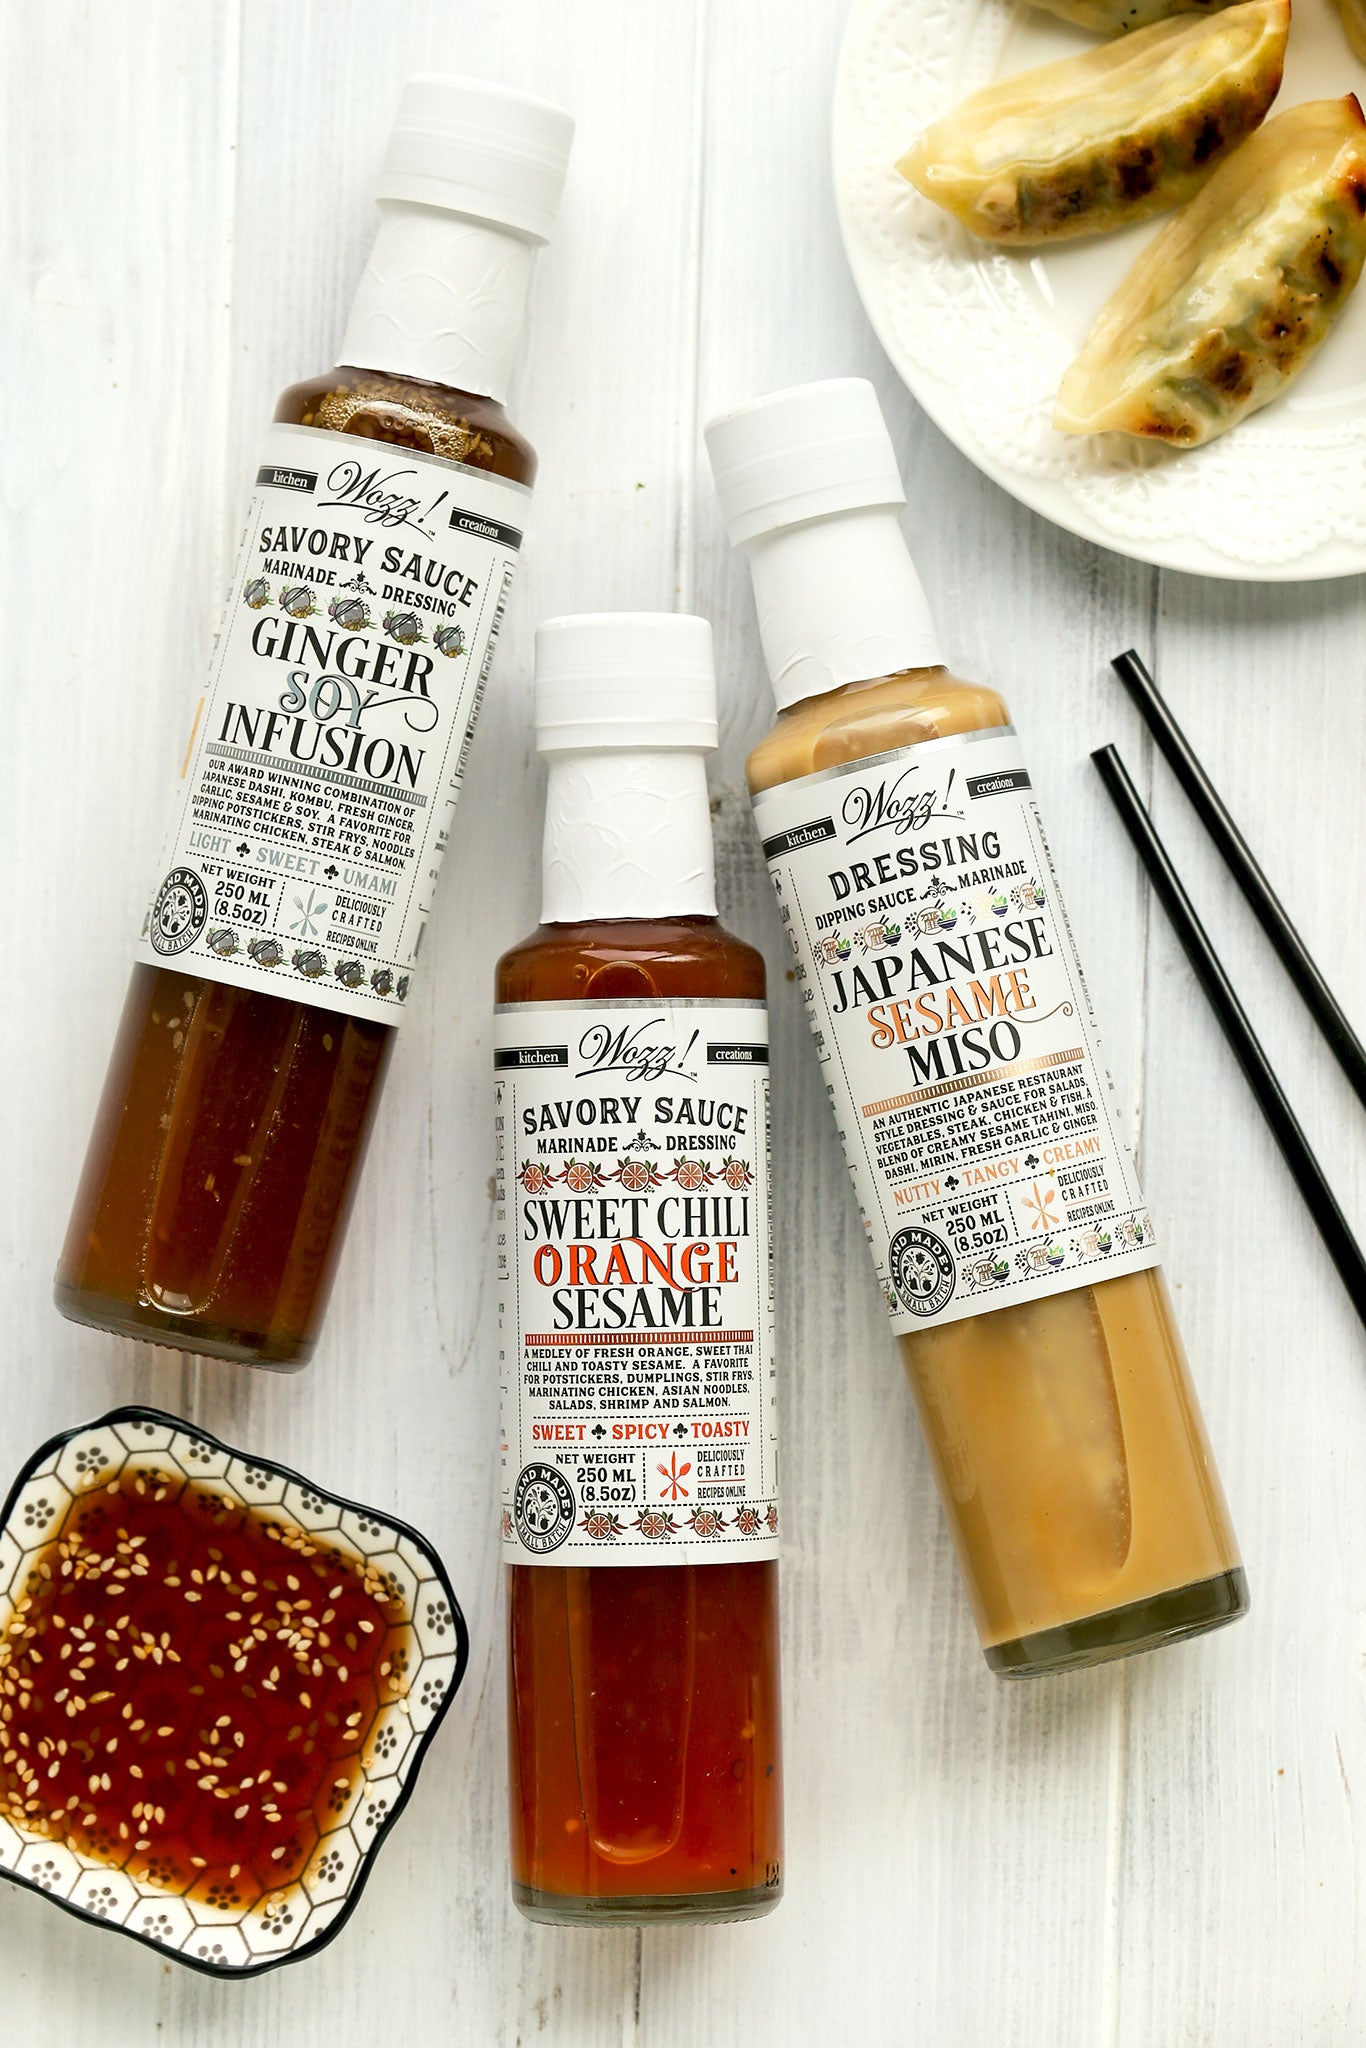 My Favorite Soy Sauce Dipping Sauce - Cooking Therapy